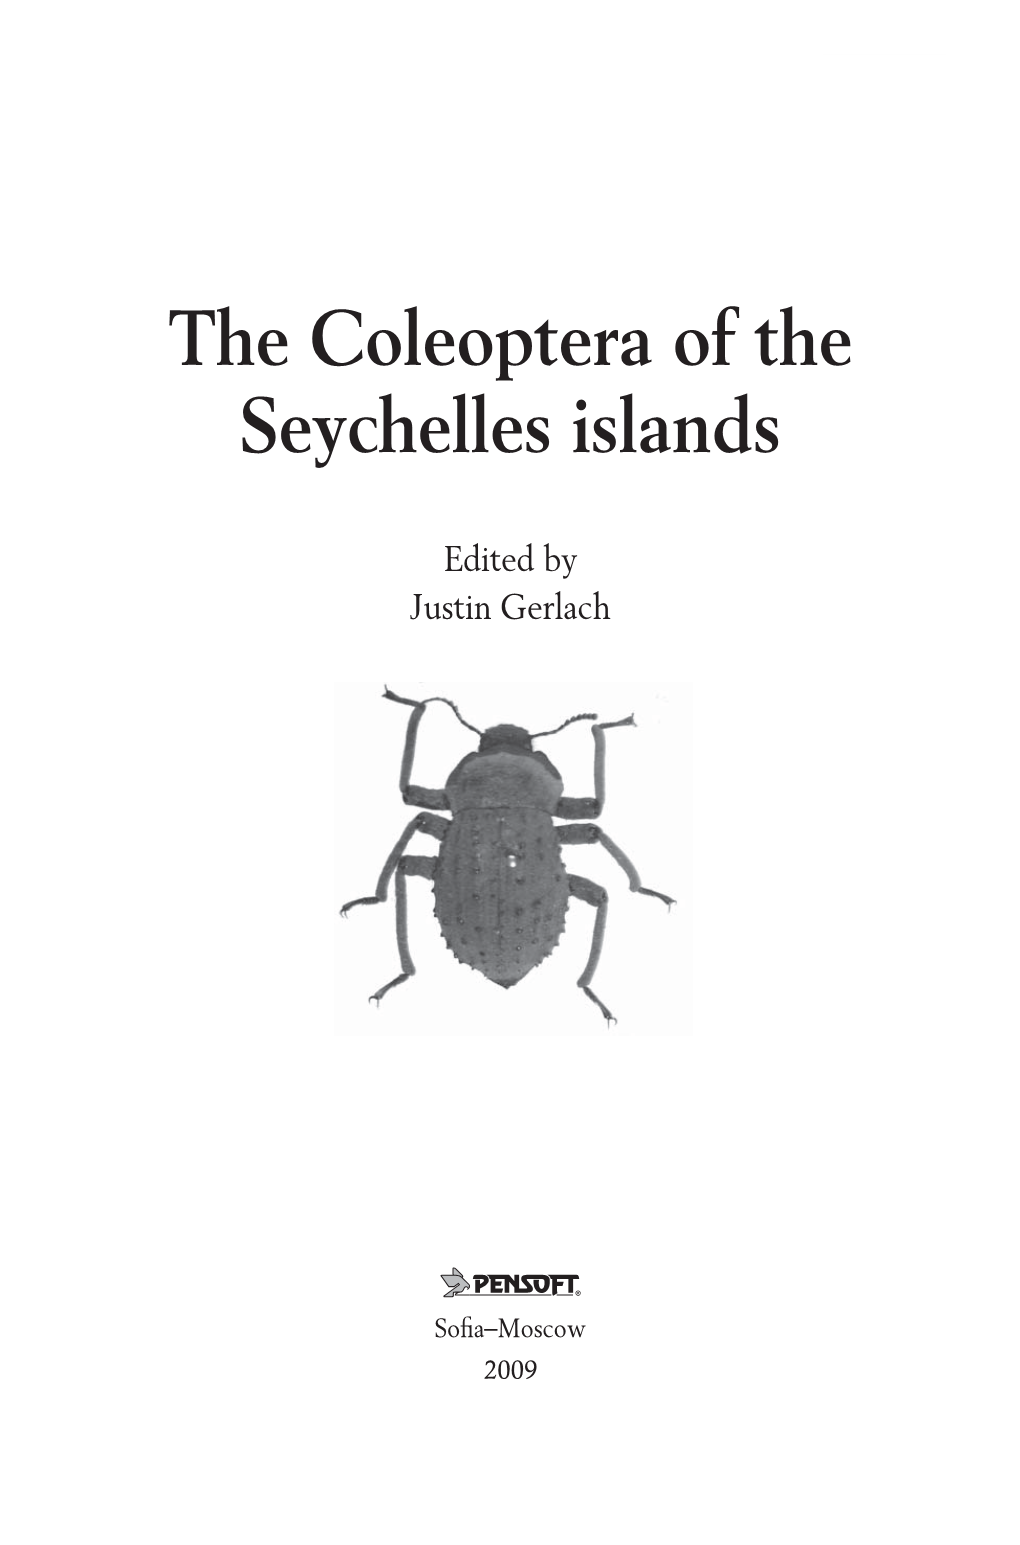 The Coleoptera of the Seychelles Islands